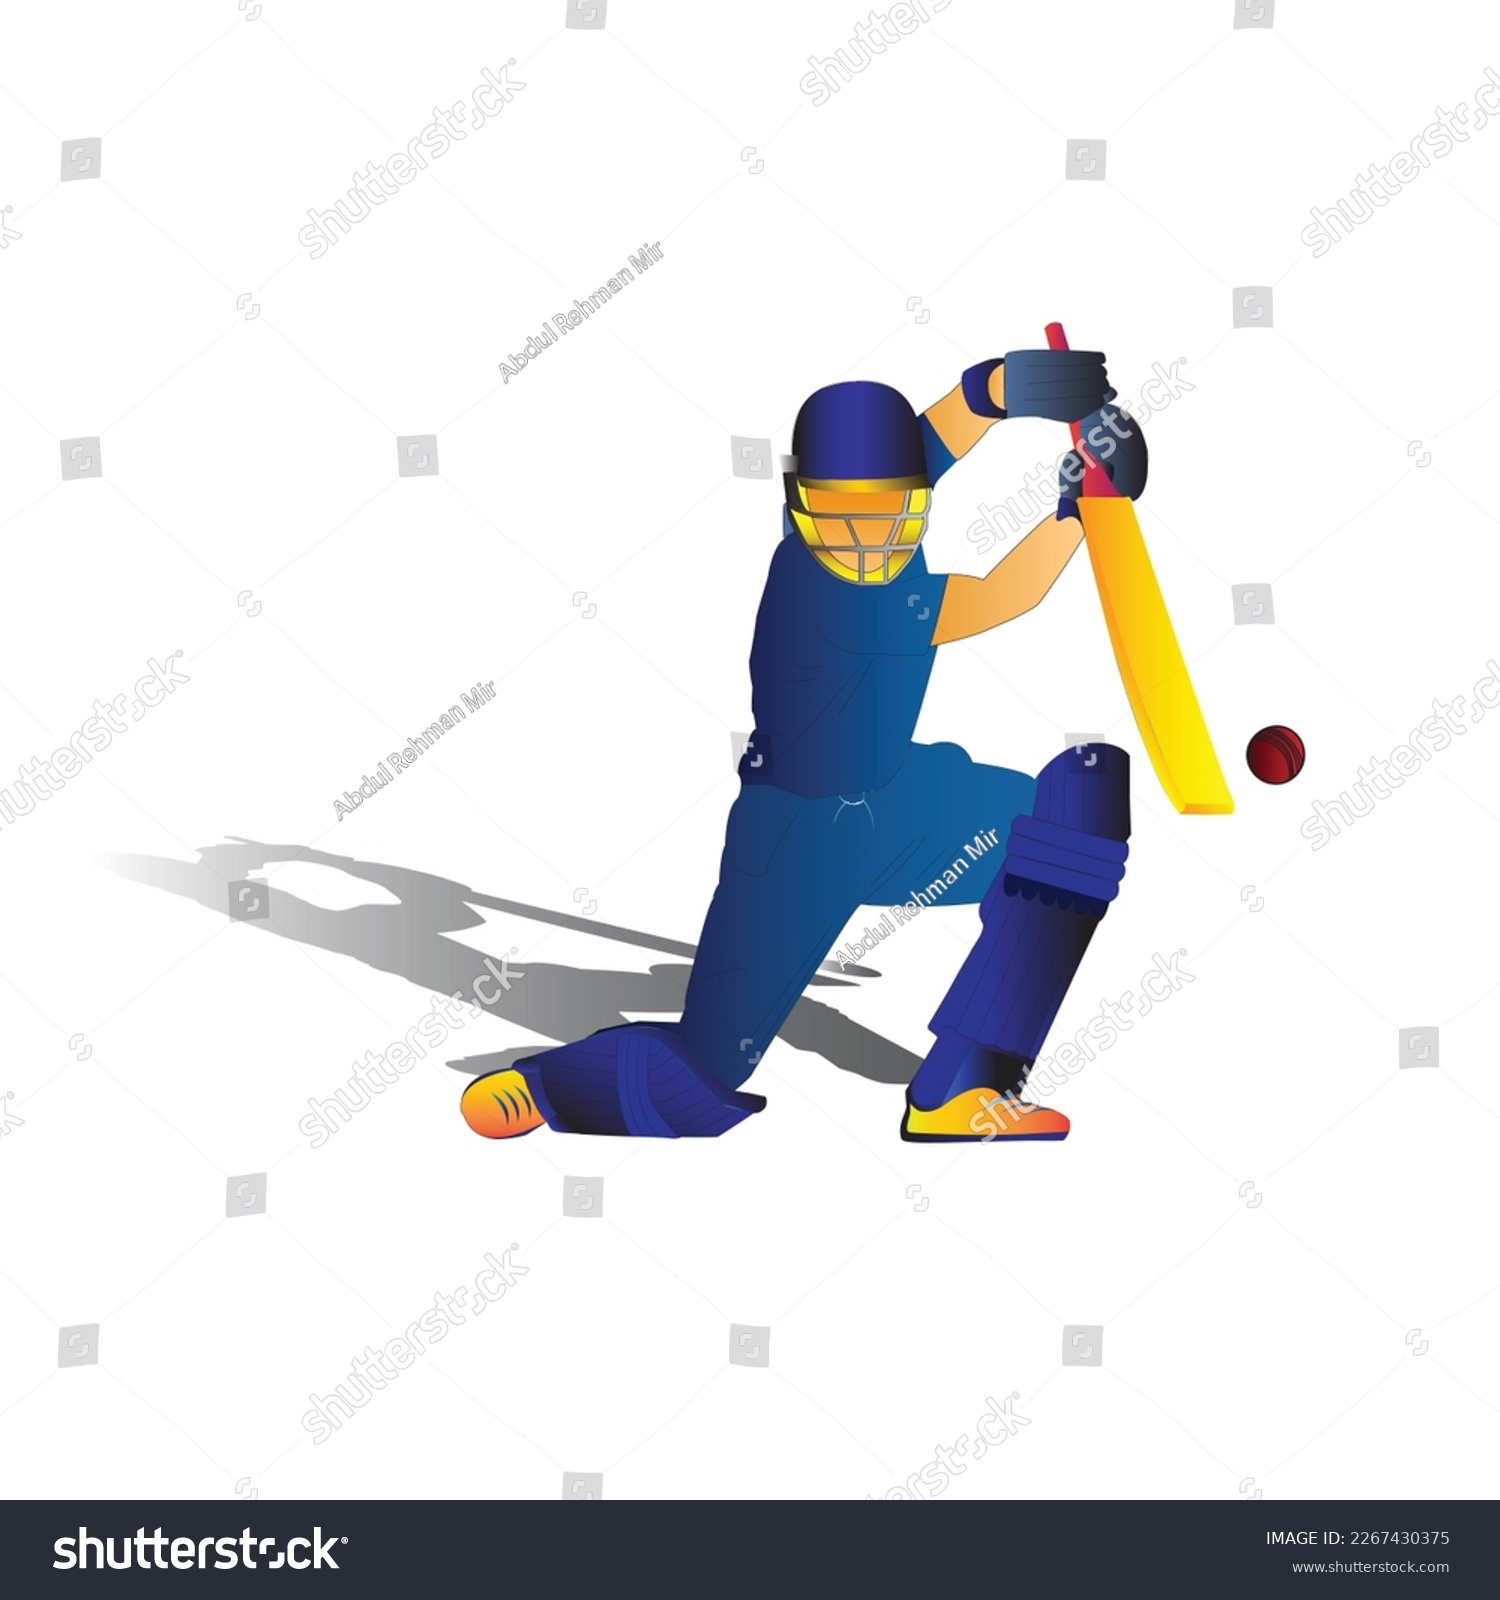 SVG of Batsman playing a shot in Cricket with a Ball. Shot is Cover Drive. svg